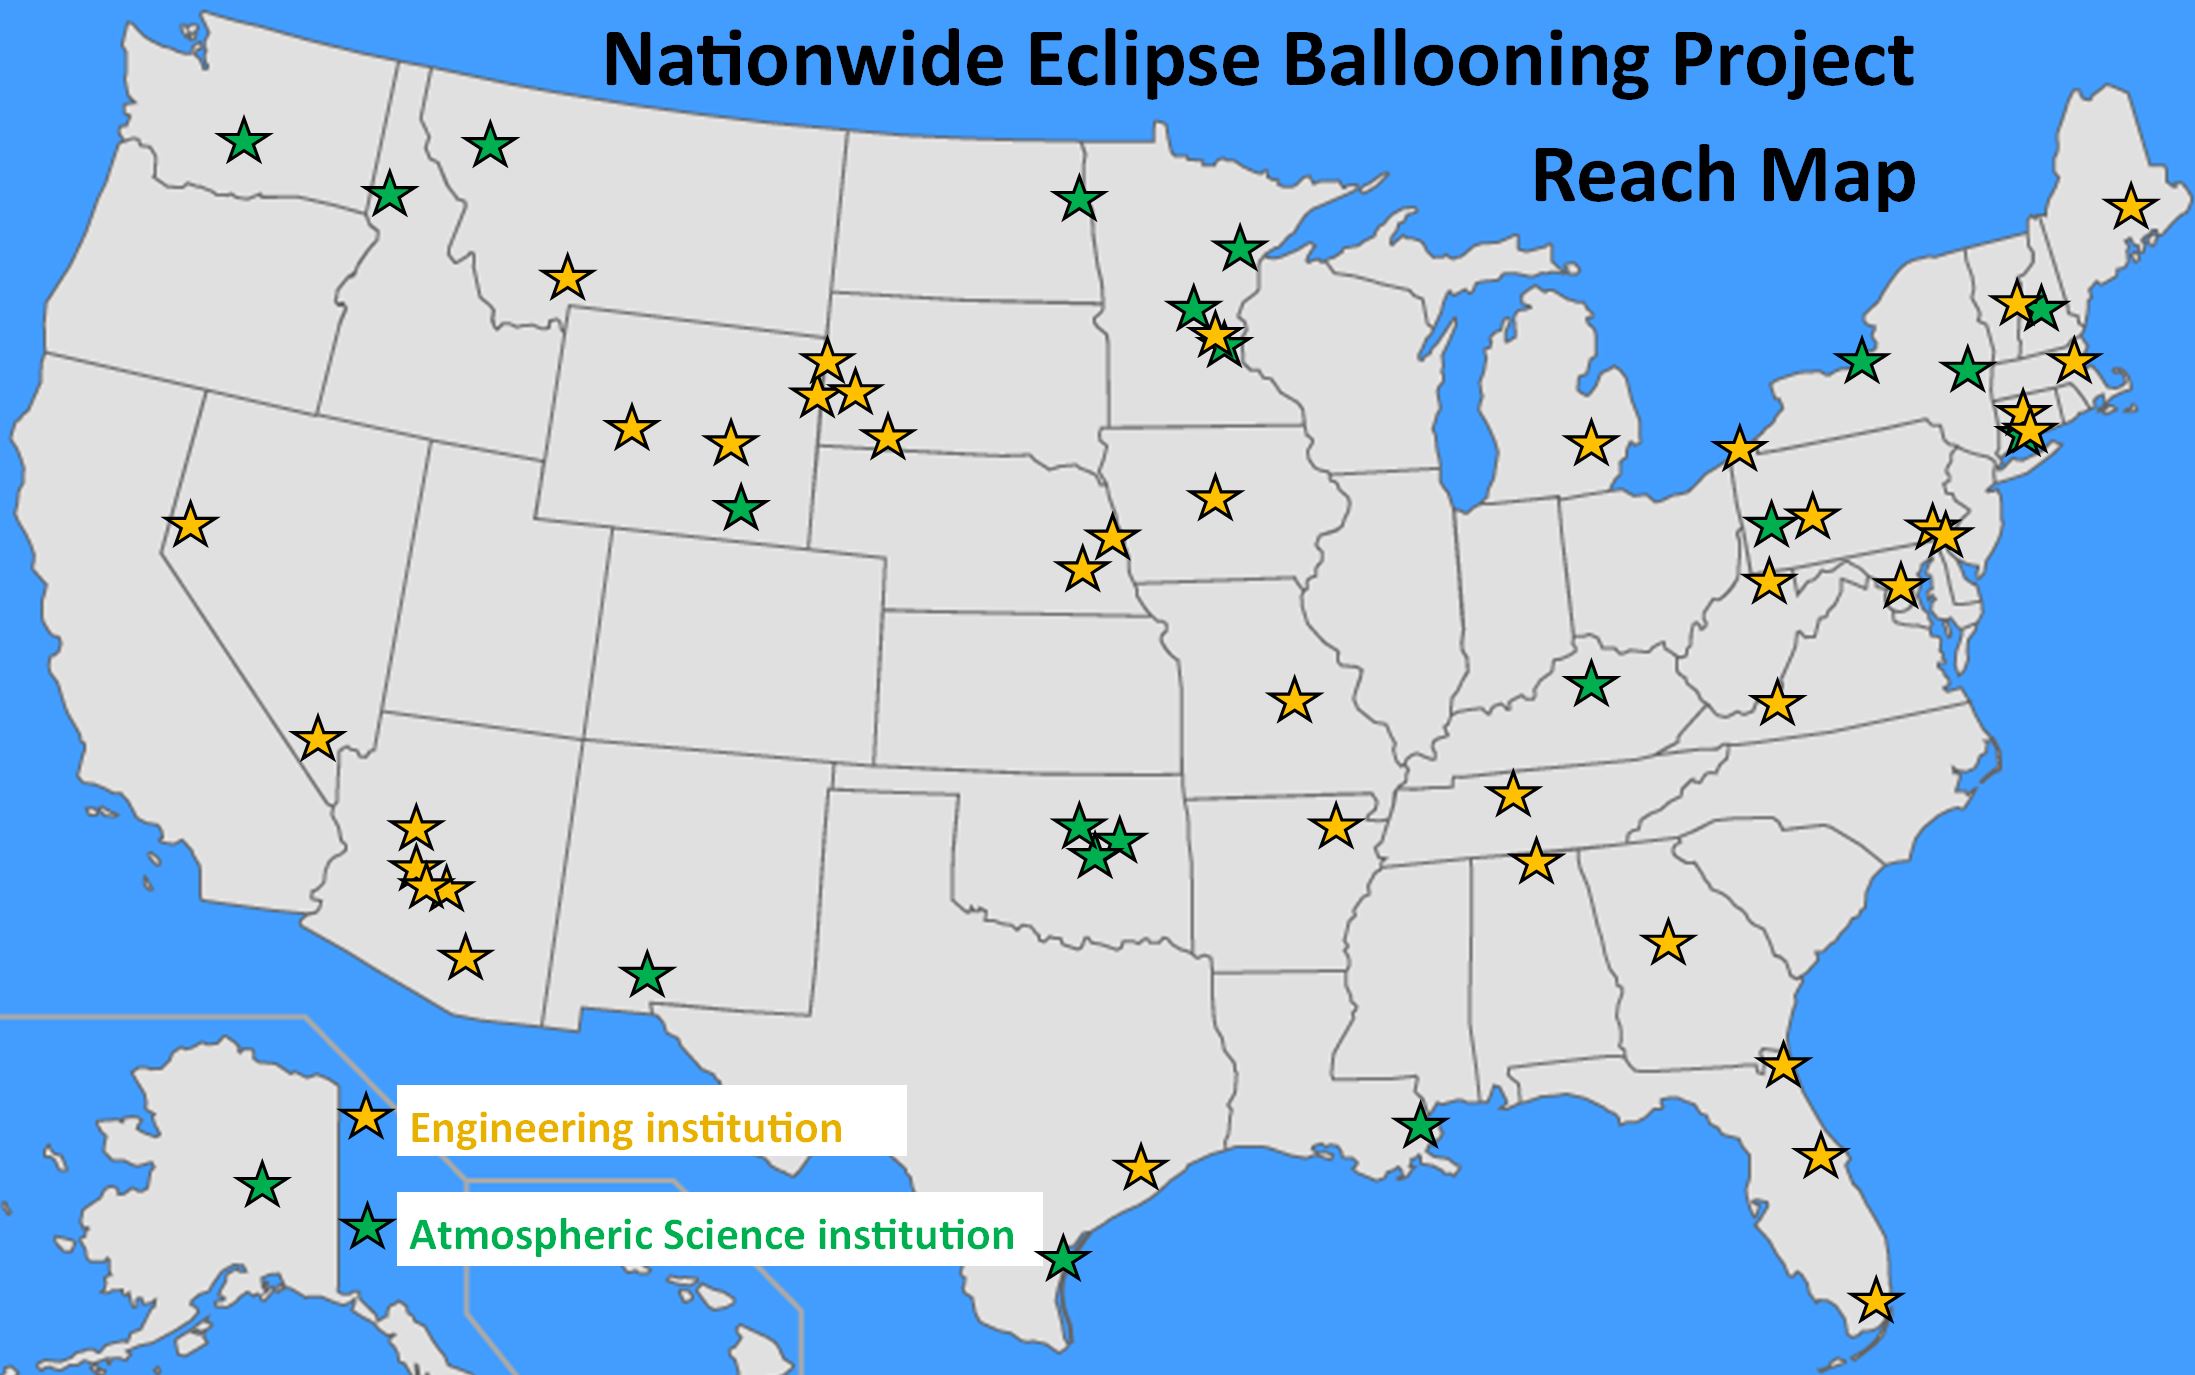 US map with state outlines, yellow stars for each Engineering institution, and green stars for each Atmospheric Science institution